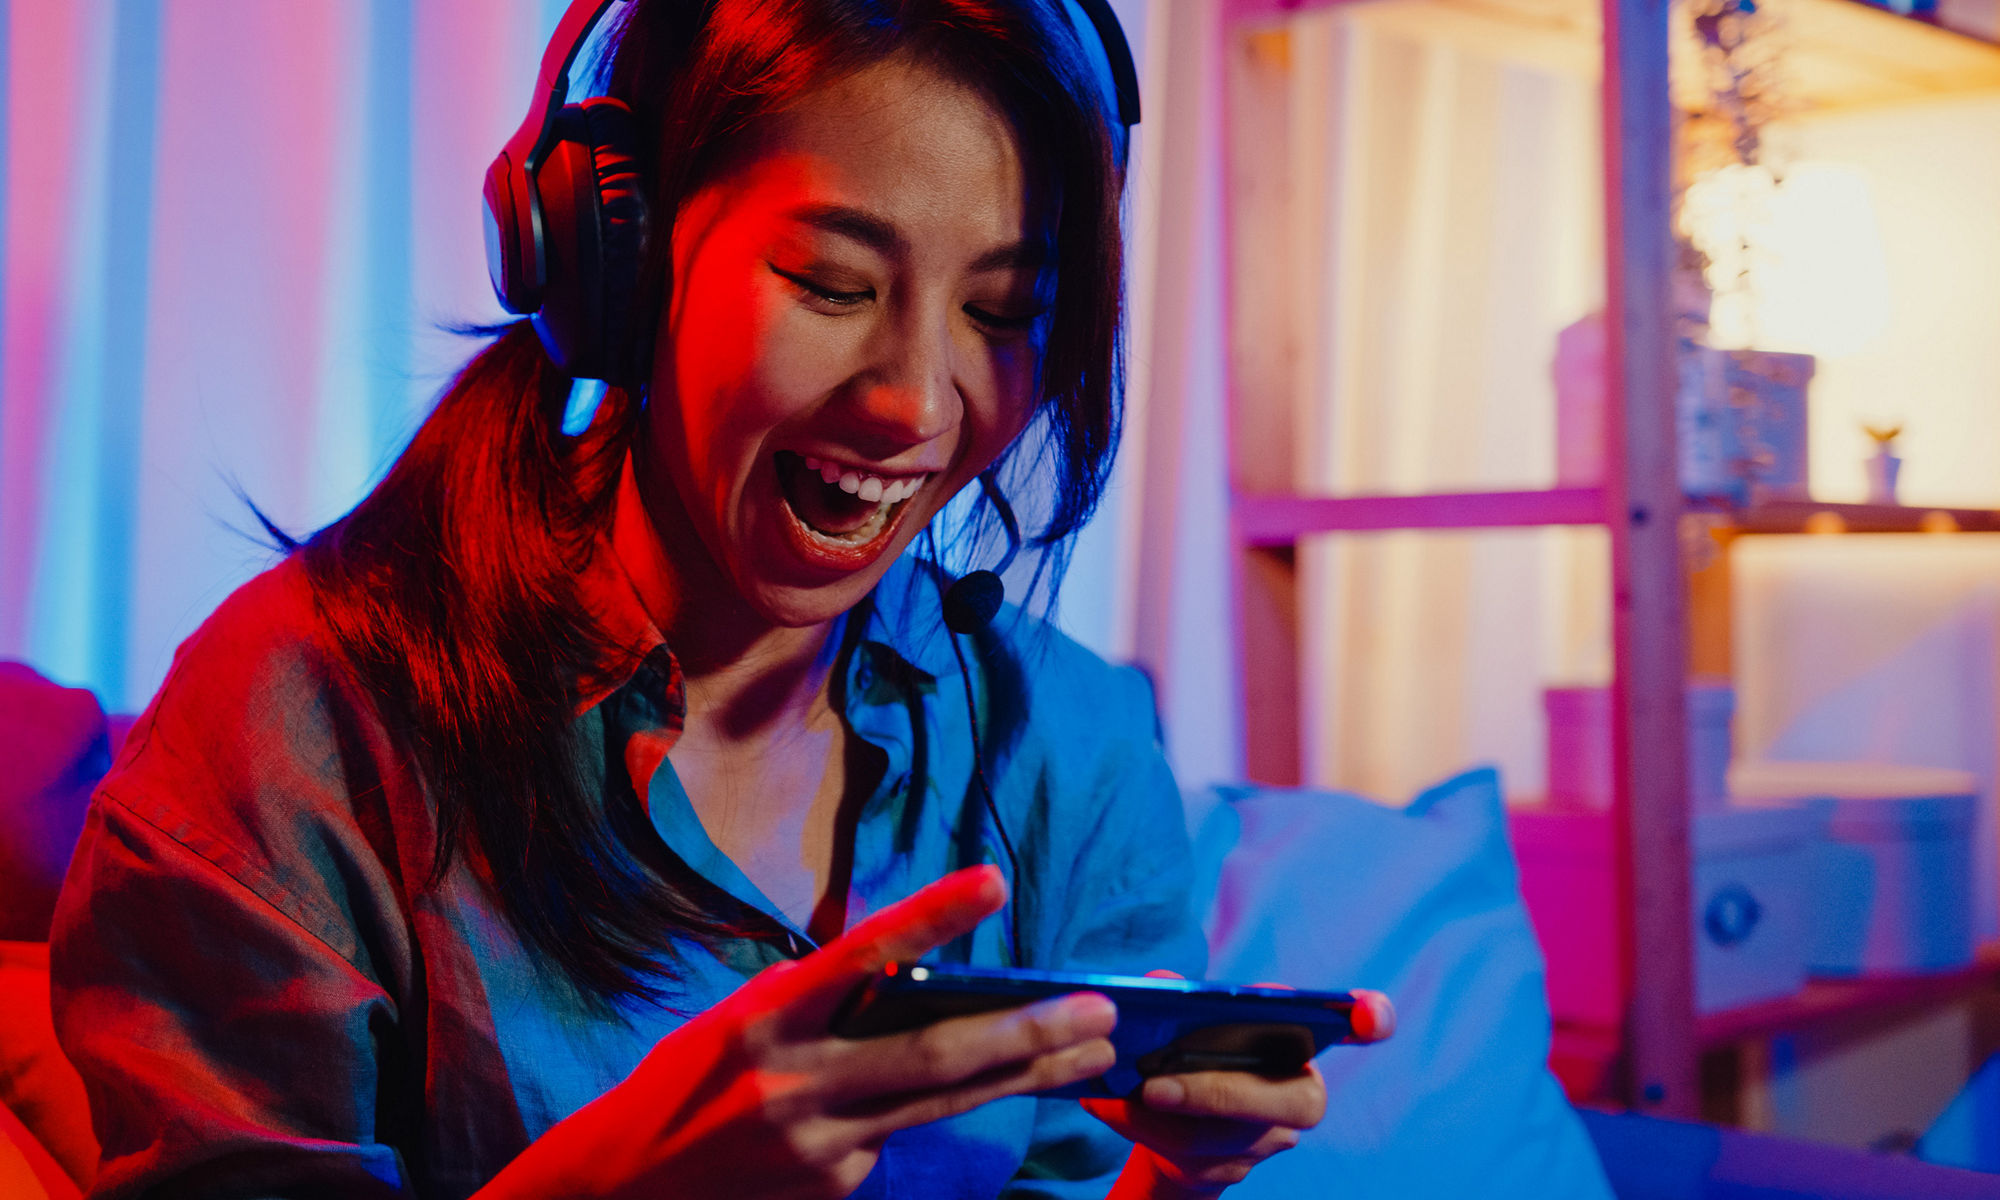 Girl wearing headphone playing a game on her phone